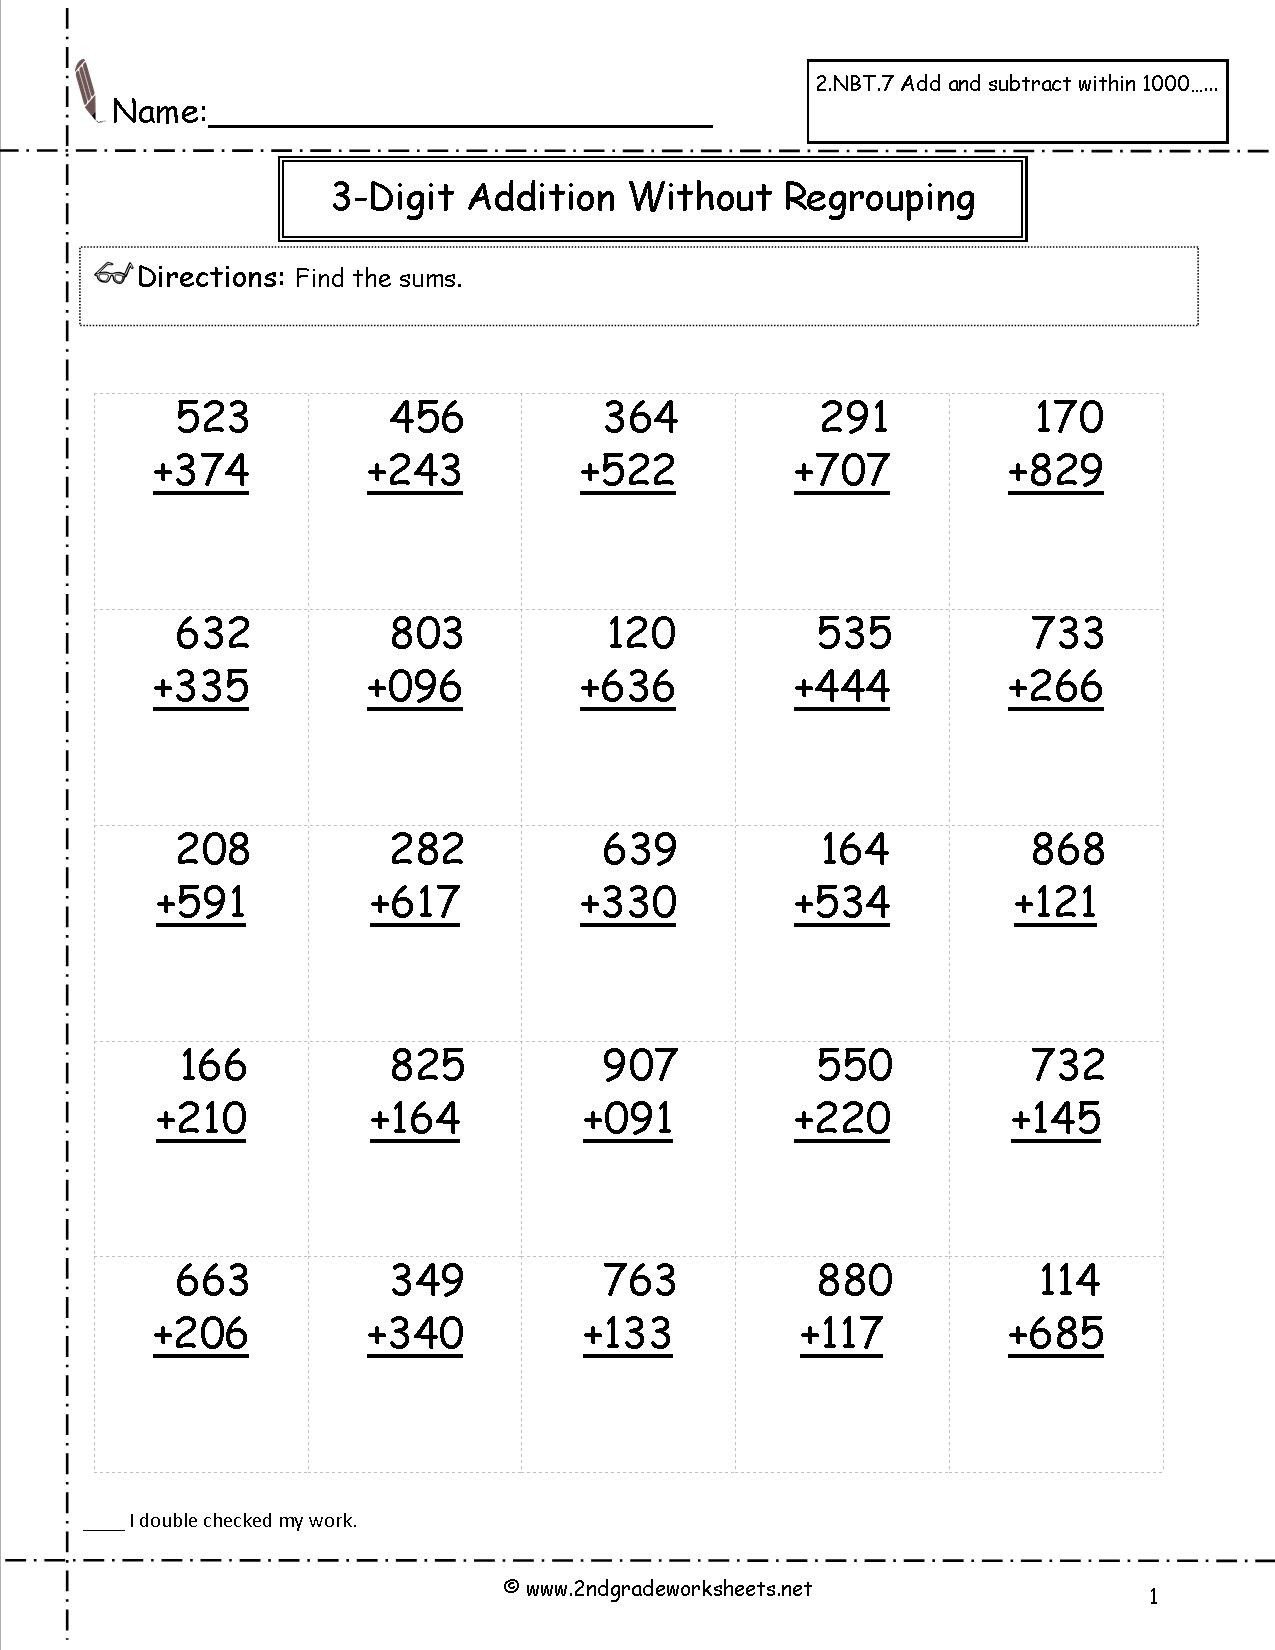 Free Math Worksheets Second Grade 2 Subtraction Subtract 2 Digit Numbers No Regrouping